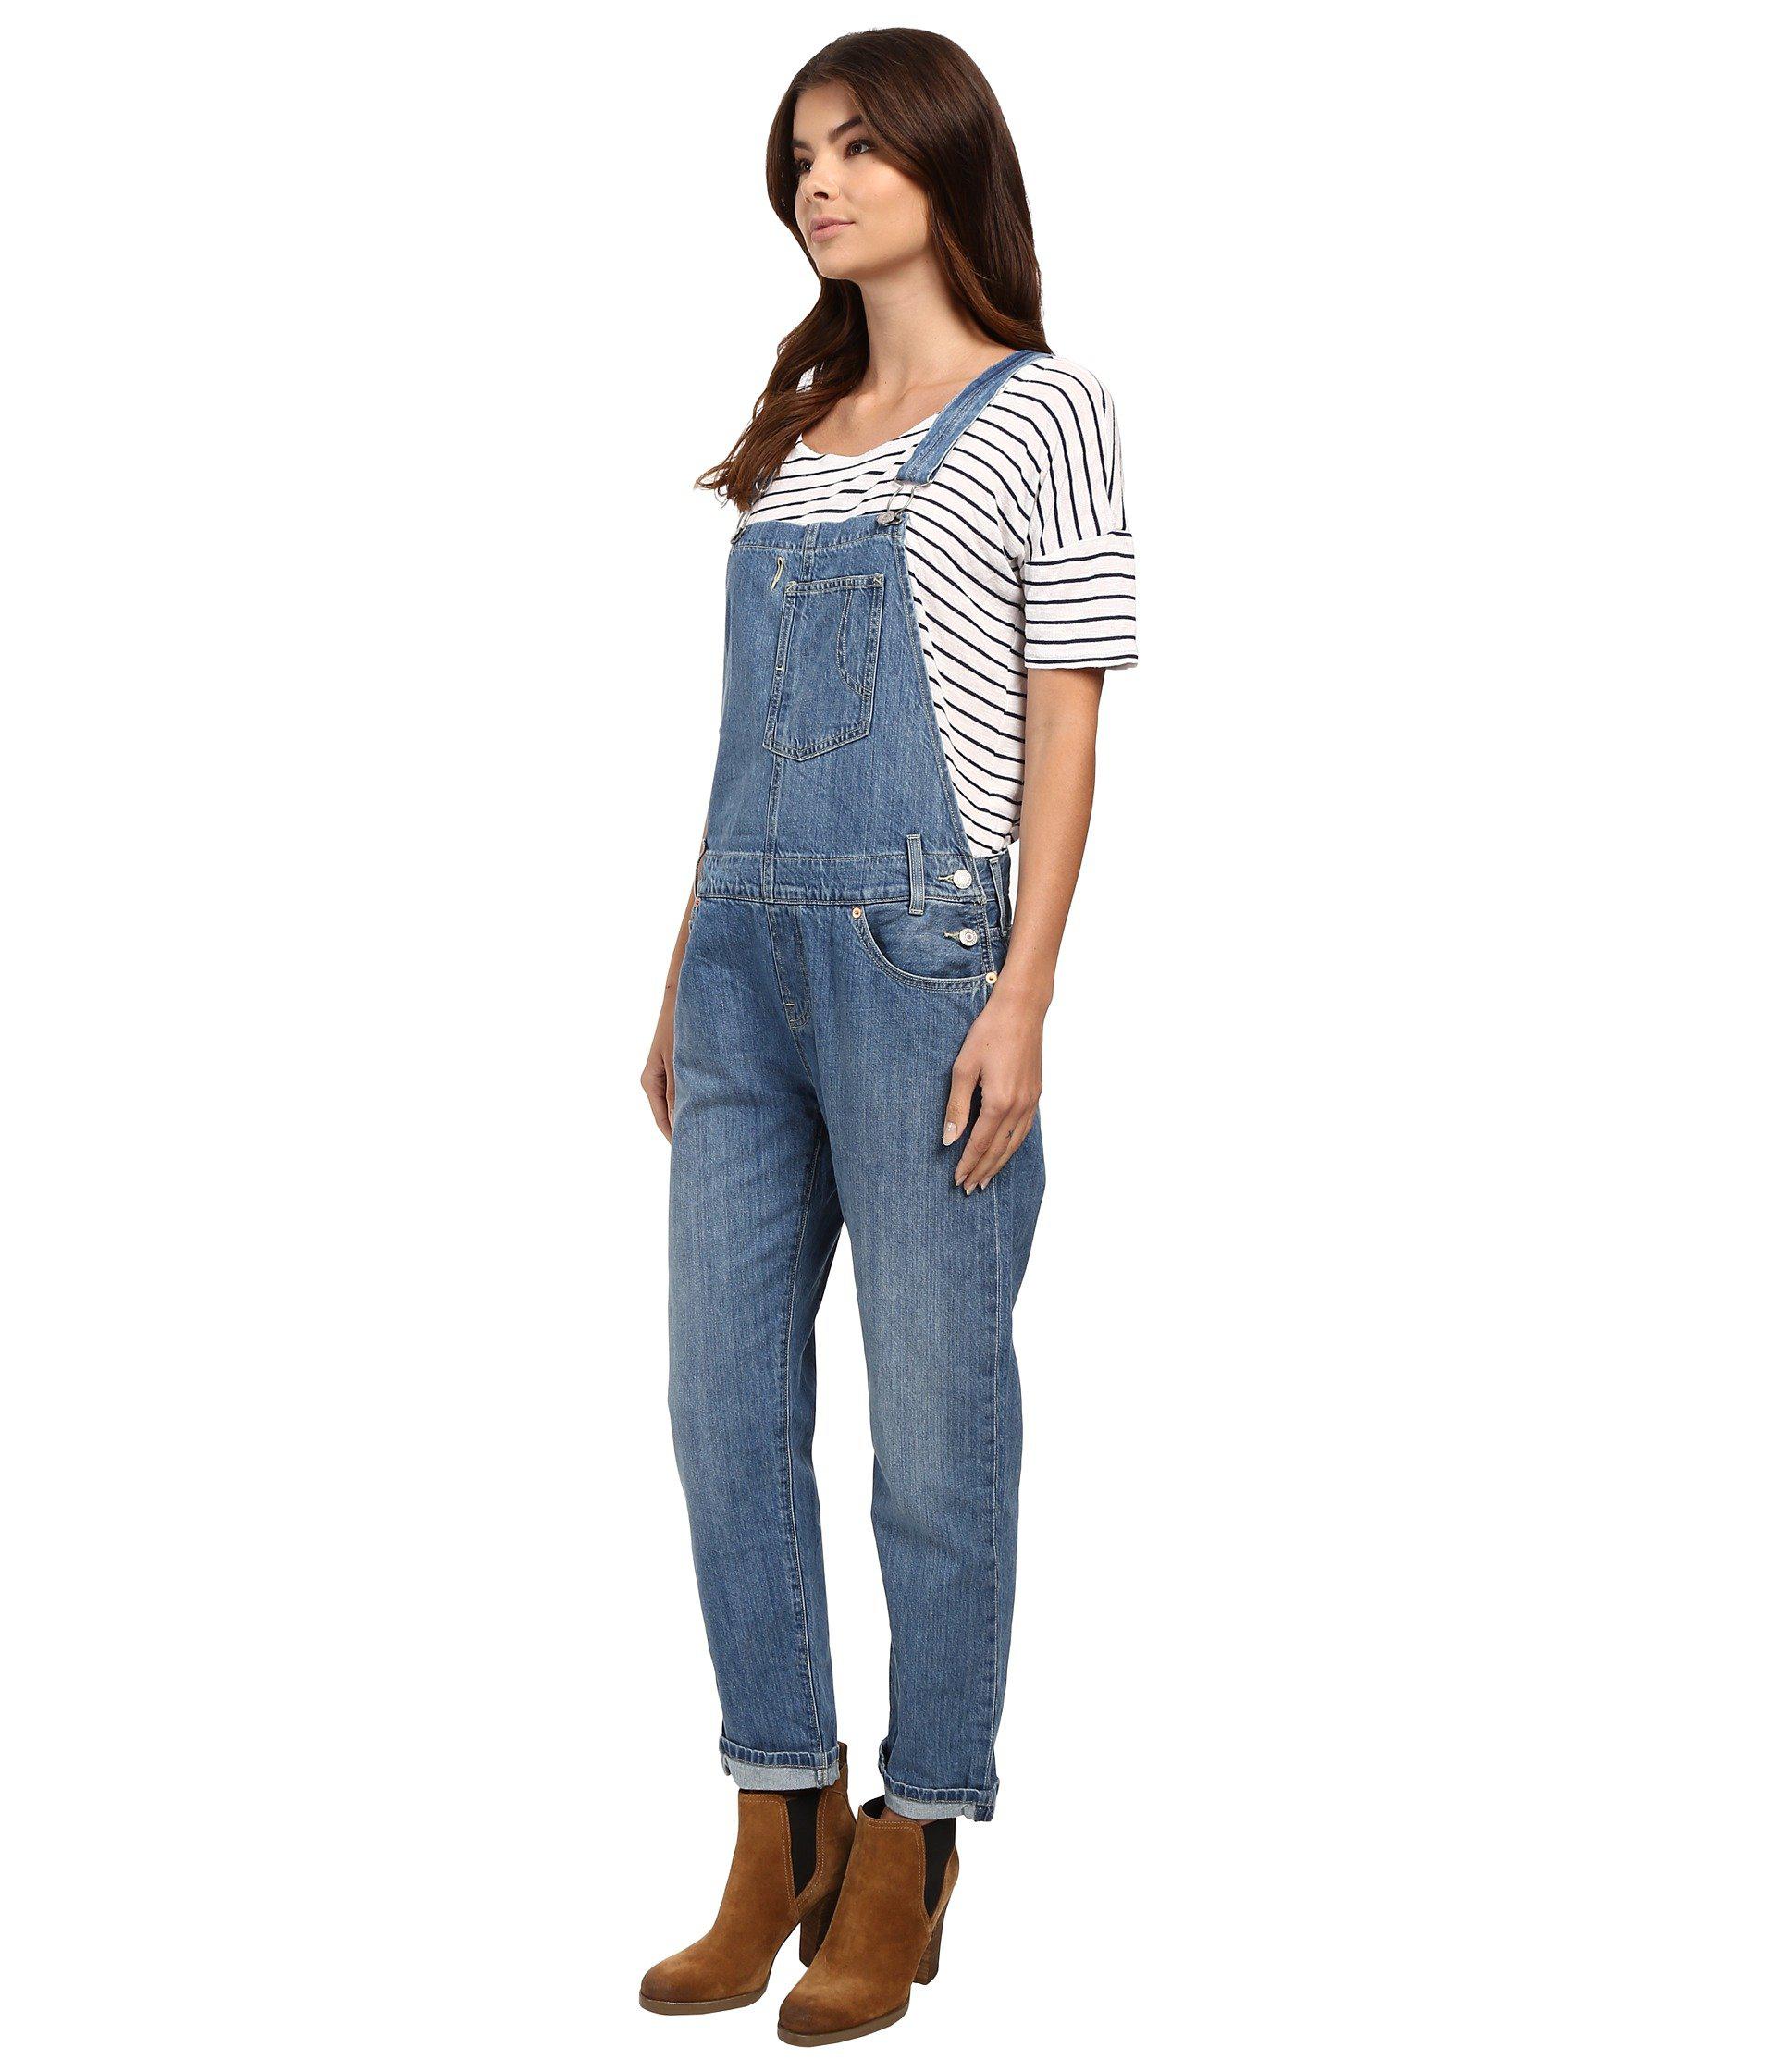 Levi's Heritage Overalls Dungarees Top Sellers, 60% OFF |  www.museodeltaantico.com